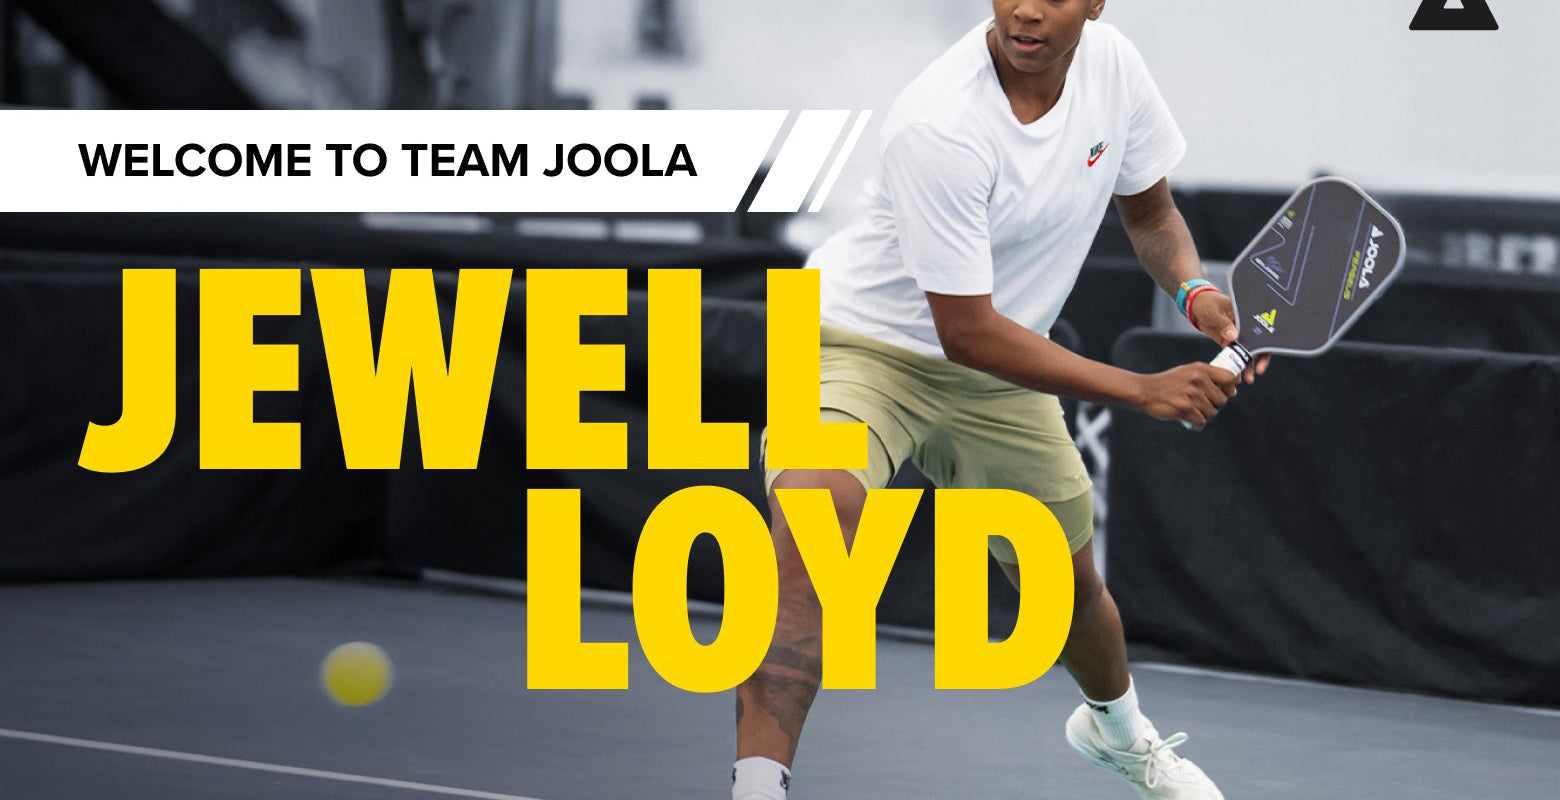 WNBA SUPERSTAR JEWELL LOYD MAKES A GRAND CROSSOVER TO PICKLEBALL, JOINS JOOLA AS SPONSORED ATHLETE